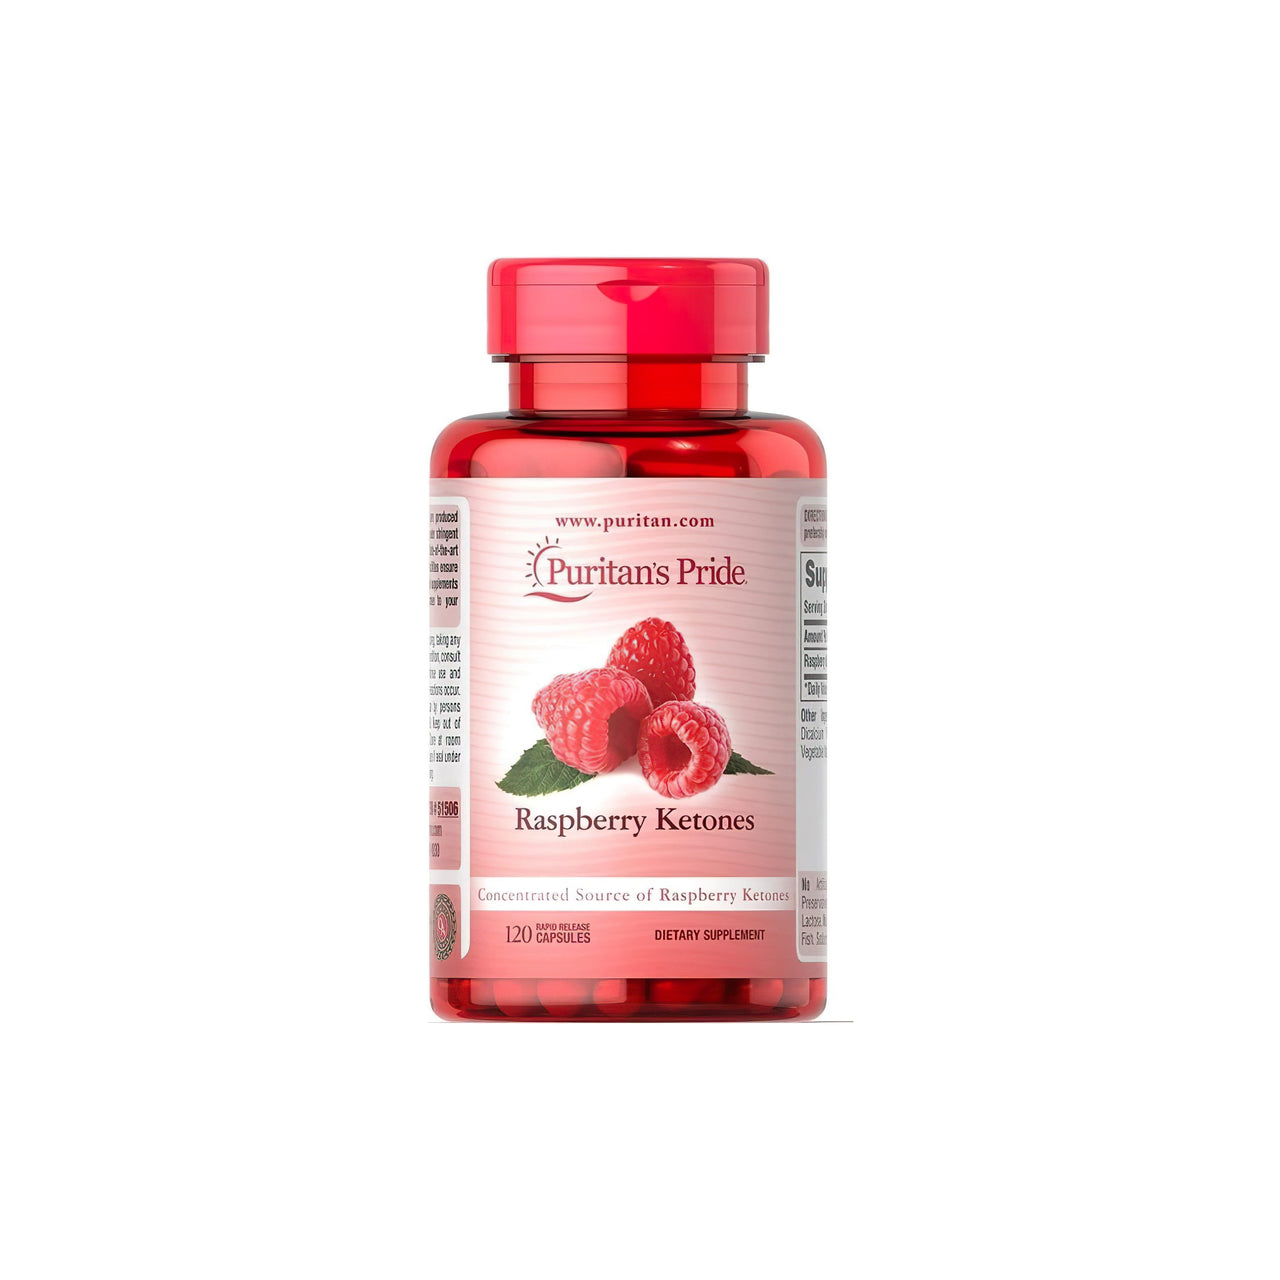 A bottle of antioxidant-rich Raspberry Ketones 100 mg 120 Rapid Realase capsules from the brand Puritan's Pride.